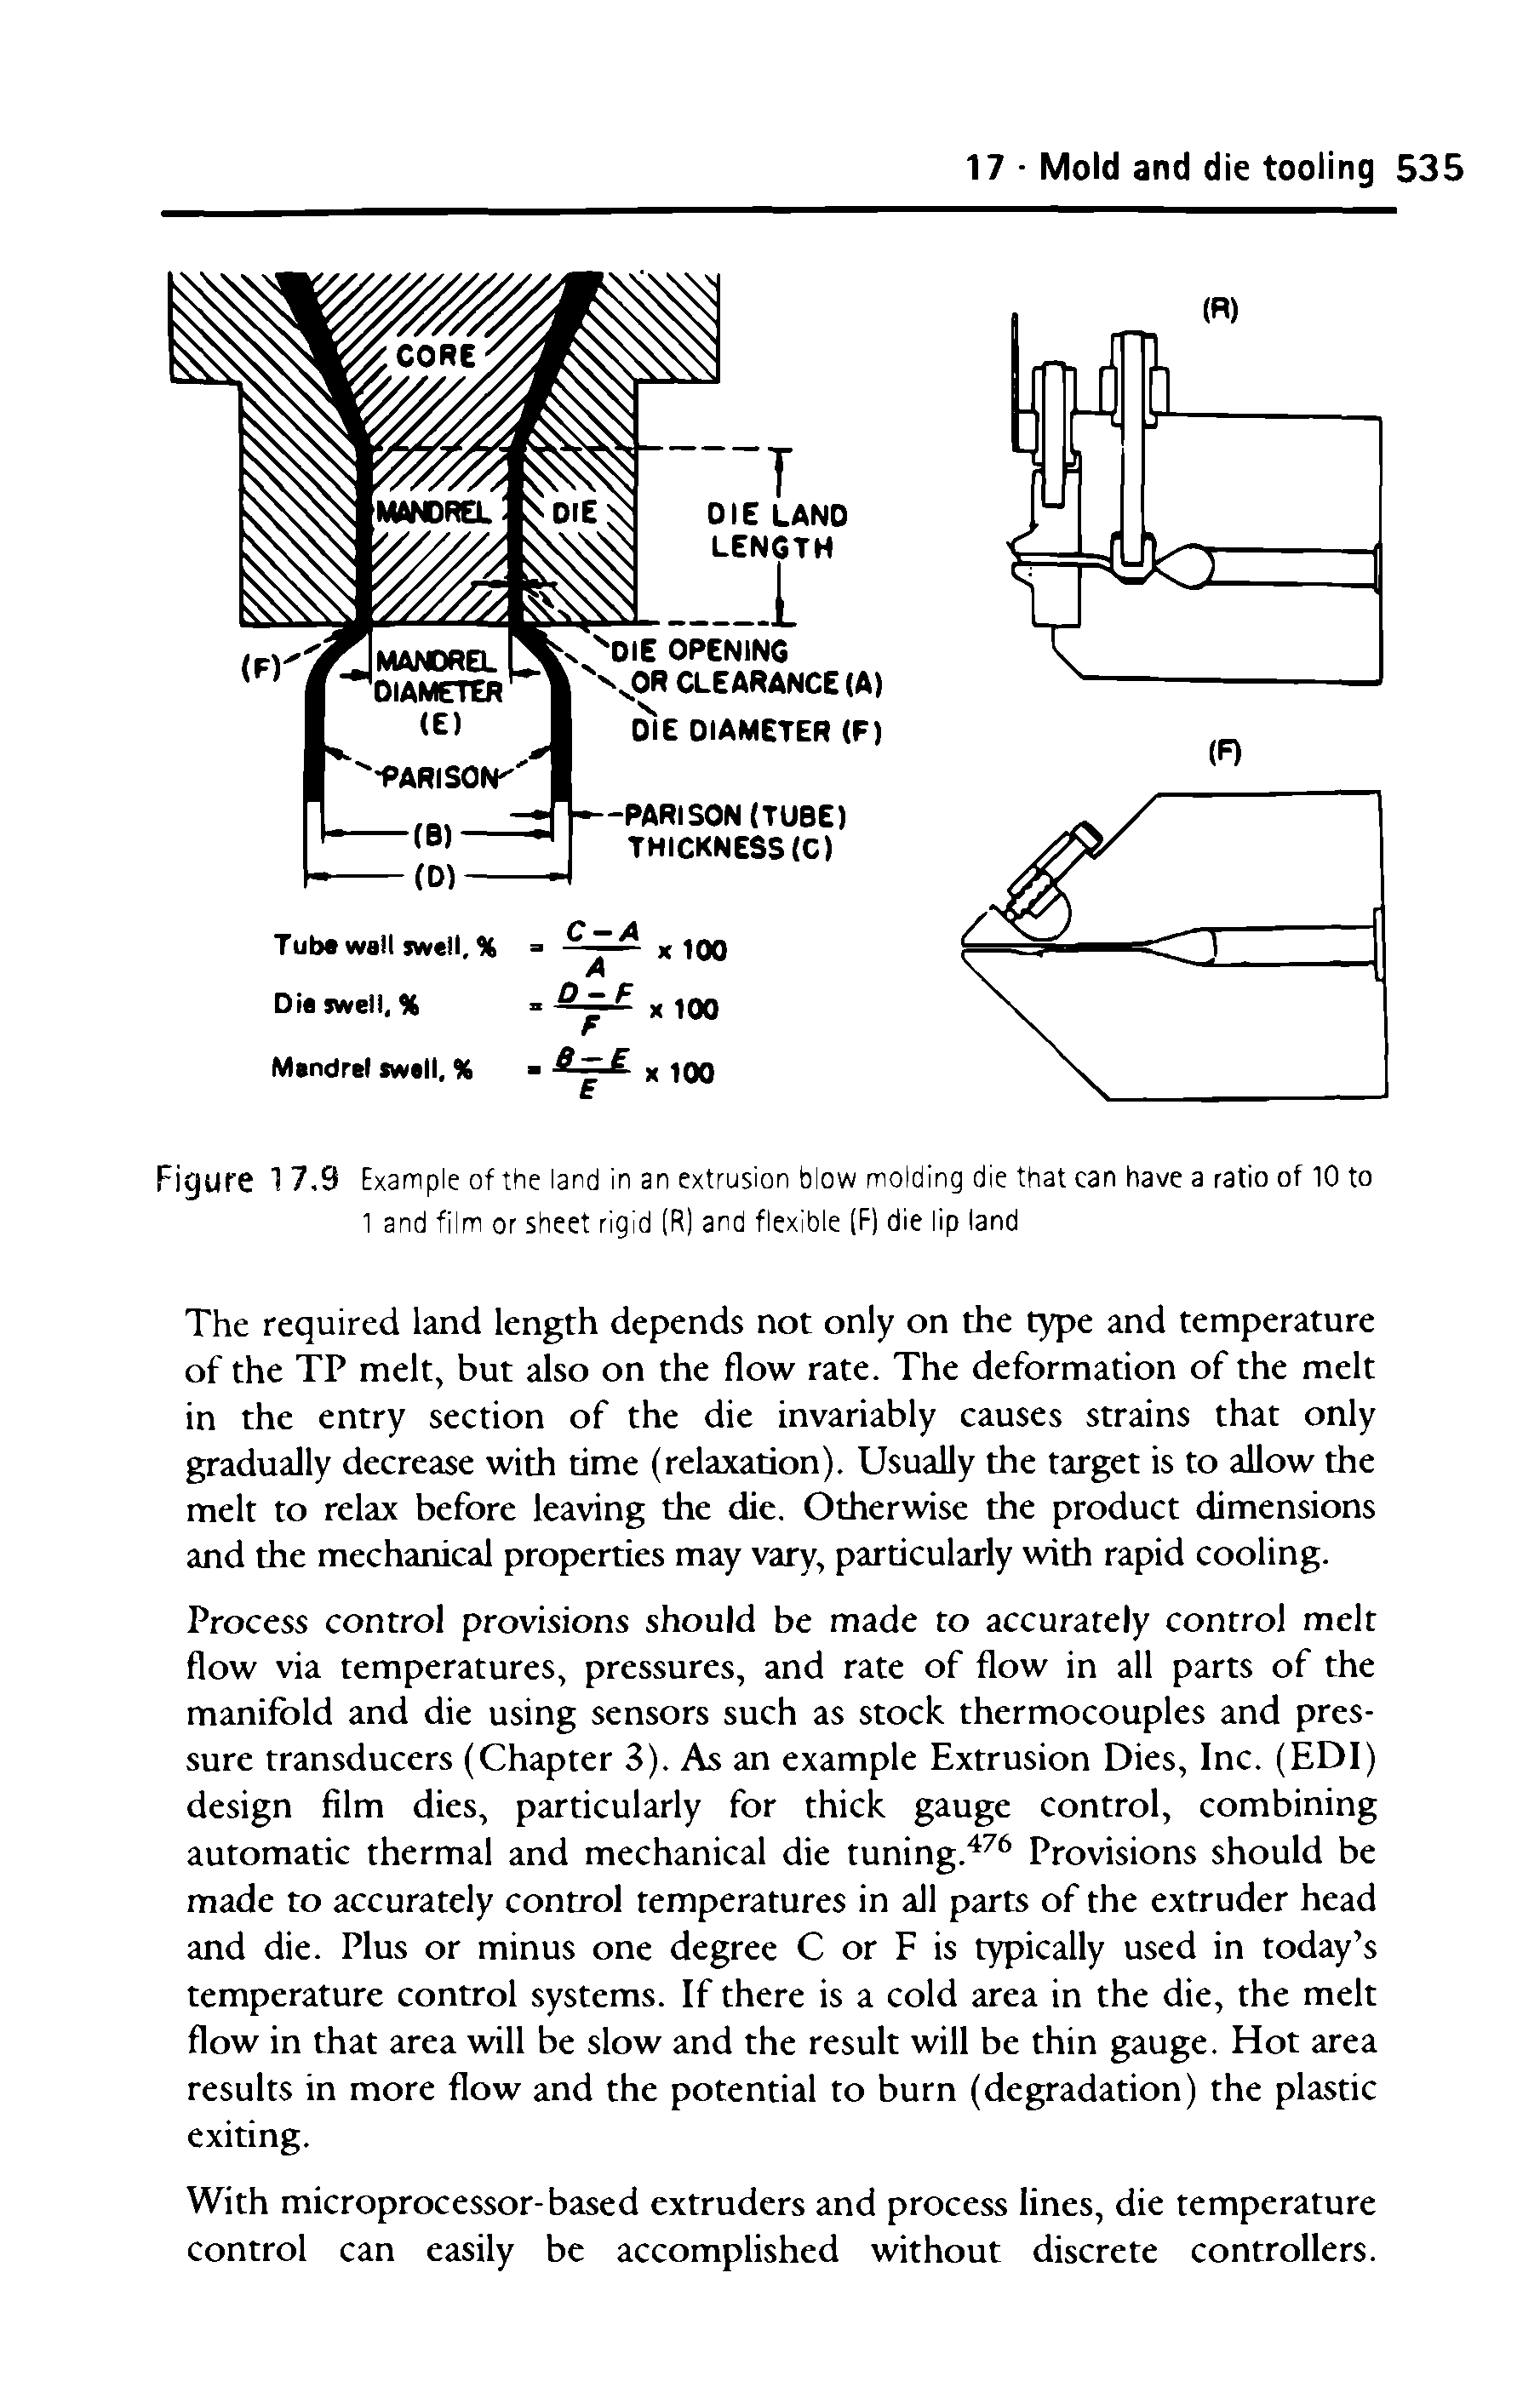 Figure 1 7.9 Example of the land in an extrusion blow molding die that can have a ratio of 10 to 1 and film or sheet rigid (R) and flexible (F) die lip land...